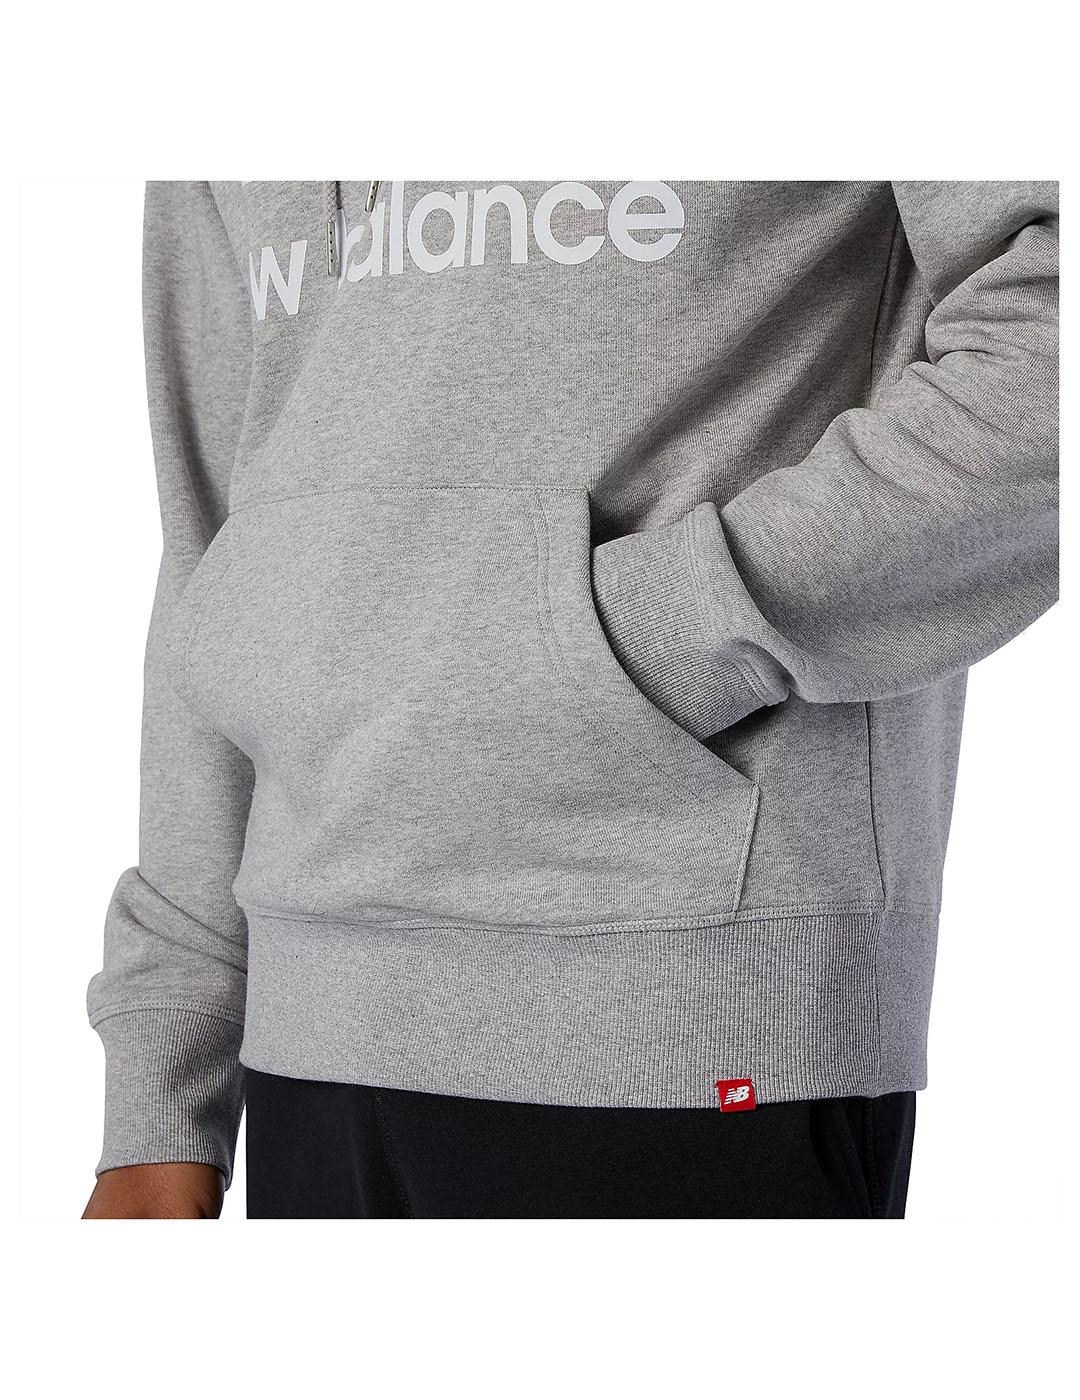 Sudadera Hombre New Balance Essential Stacked Gris